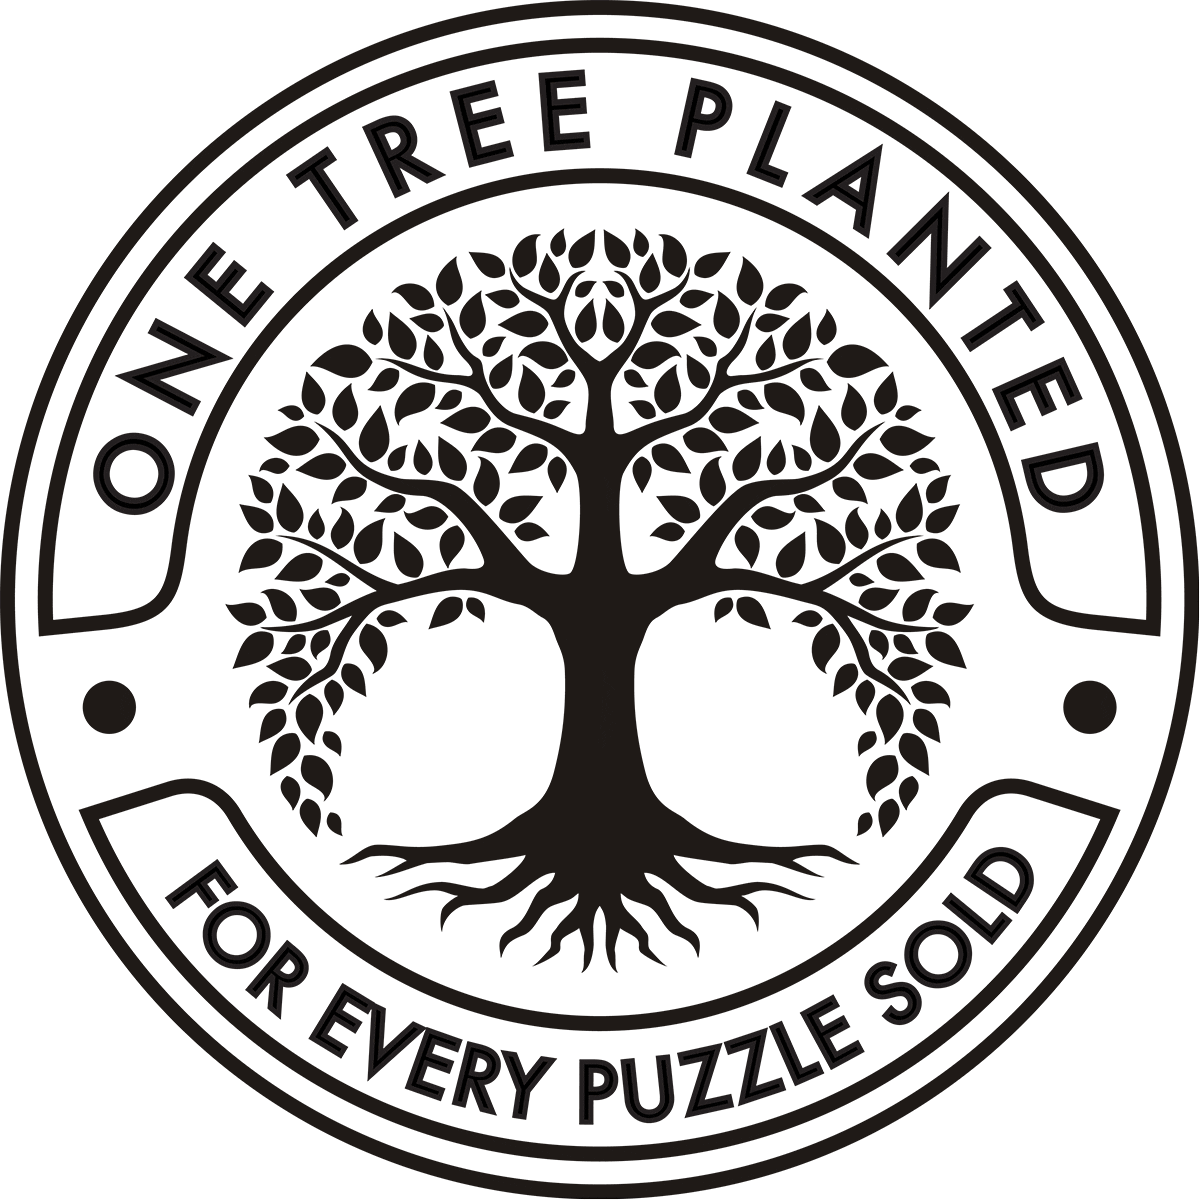 One tree planted for every puzzle sold